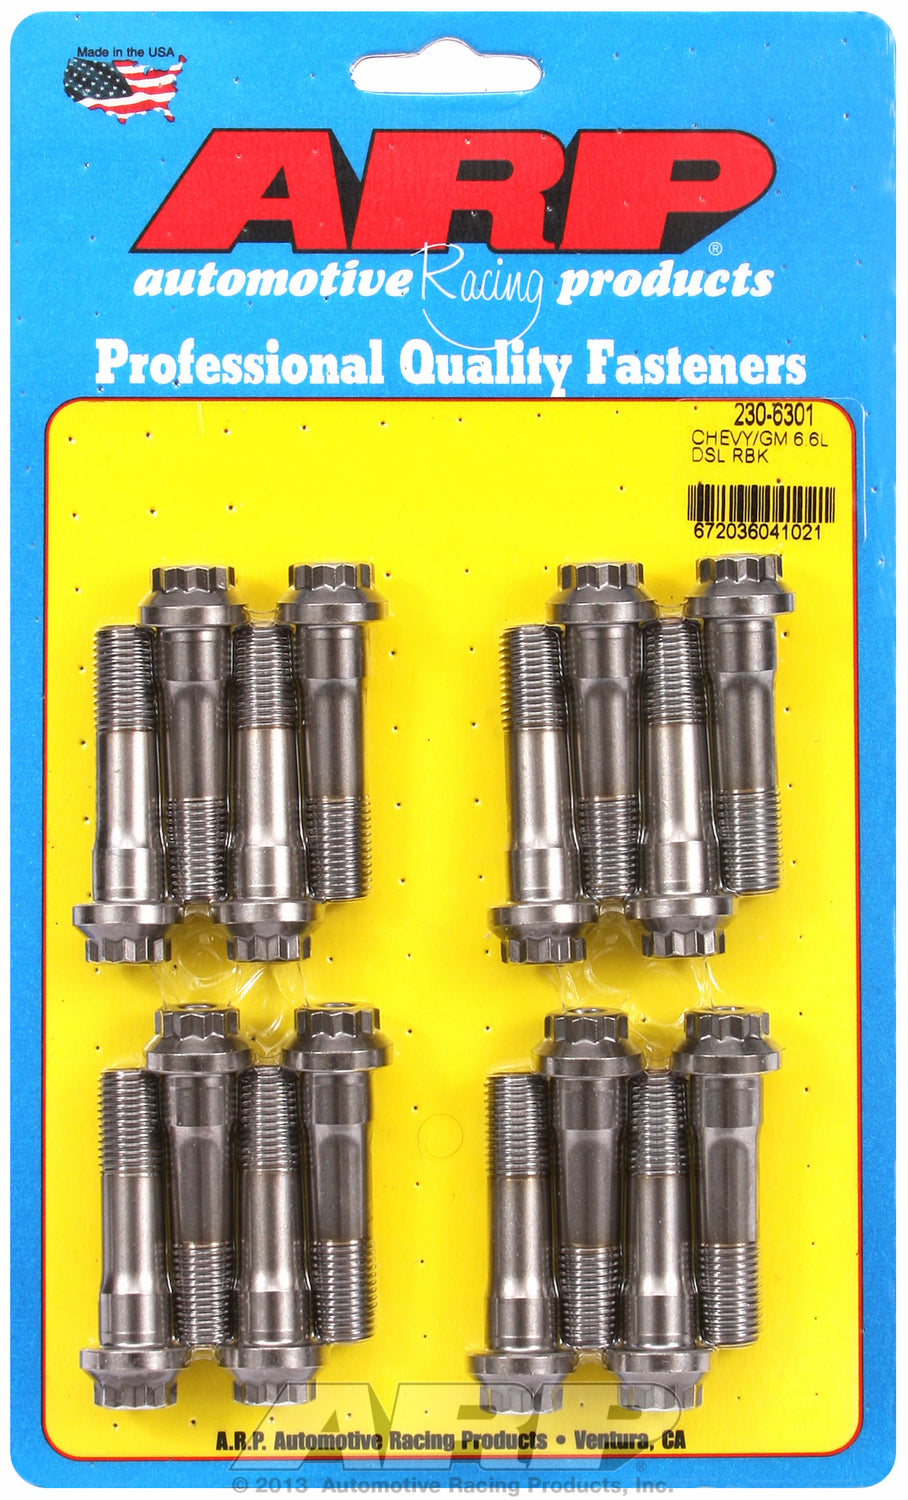 Pro Series ARP2000 Complete Rod Bolt Kit for Chevrolet Chevy/GM 6.6L Duramax